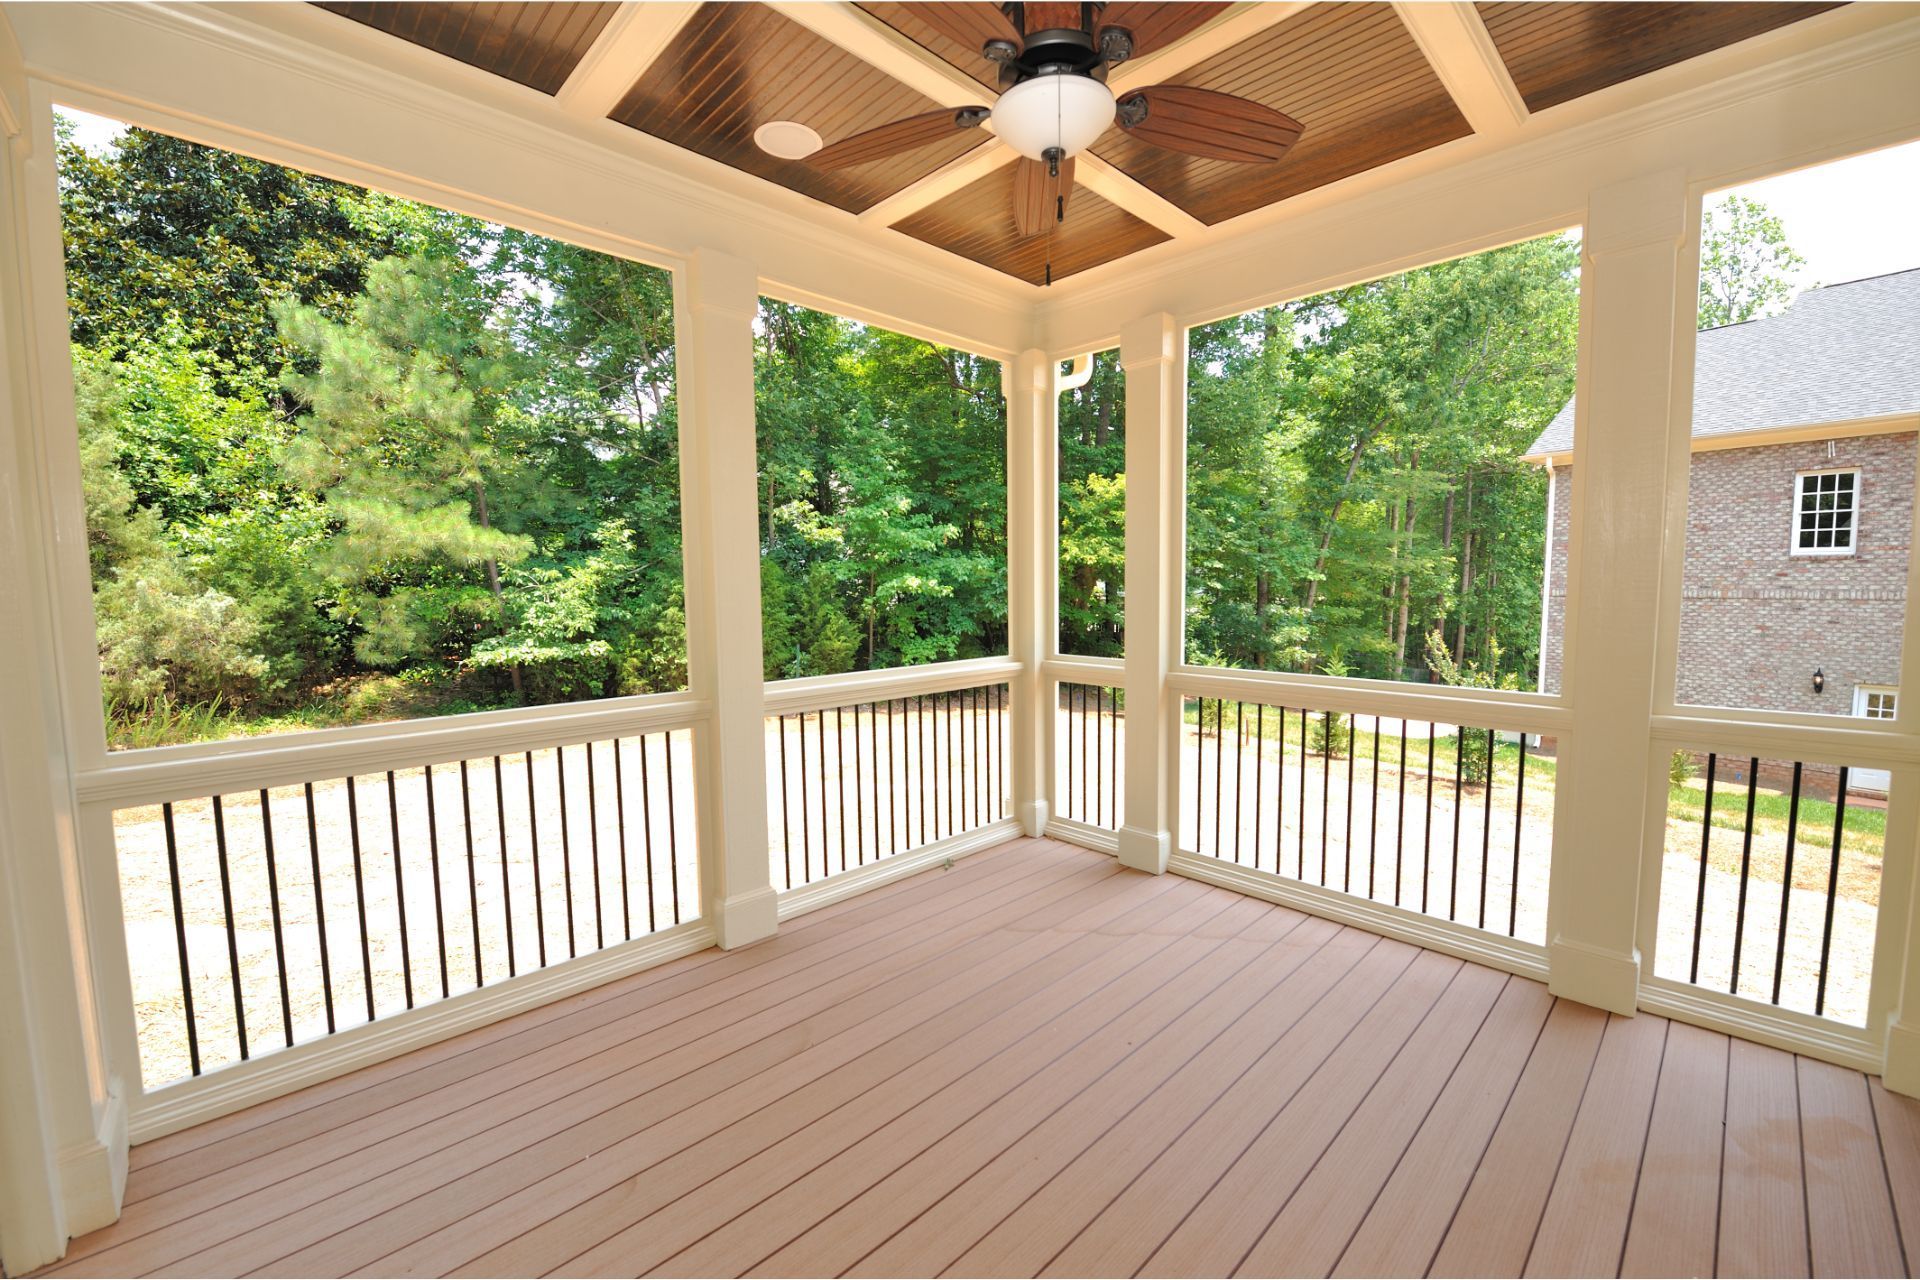 This is a spacious screened porch with a warm, wooden floor and a high, angled ceiling equipped with a ceiling fan. The space is enclosed by white, sturdy railings and large screen panels that offer a panoramic view of a lush, green backyard and neighboring brick house. The porch provides a serene and comfortable outdoor area, allowing for enjoyment of the natural surroundings without the interference of bugs or weather elements.